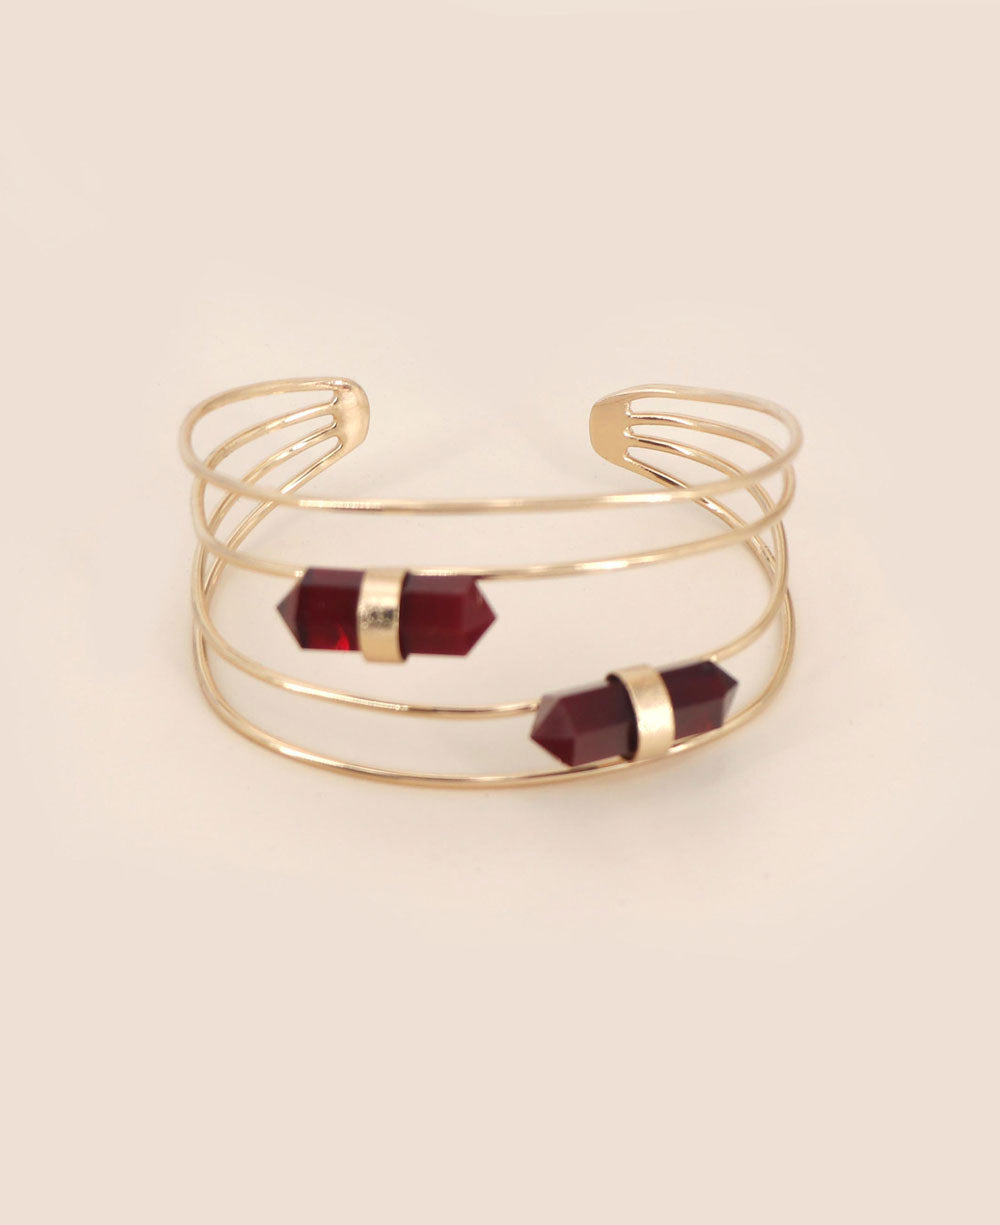 Rose Gold Plated Brass Adjustable Wire Cuff Bracelet featuring striking dual Red Onyx Points